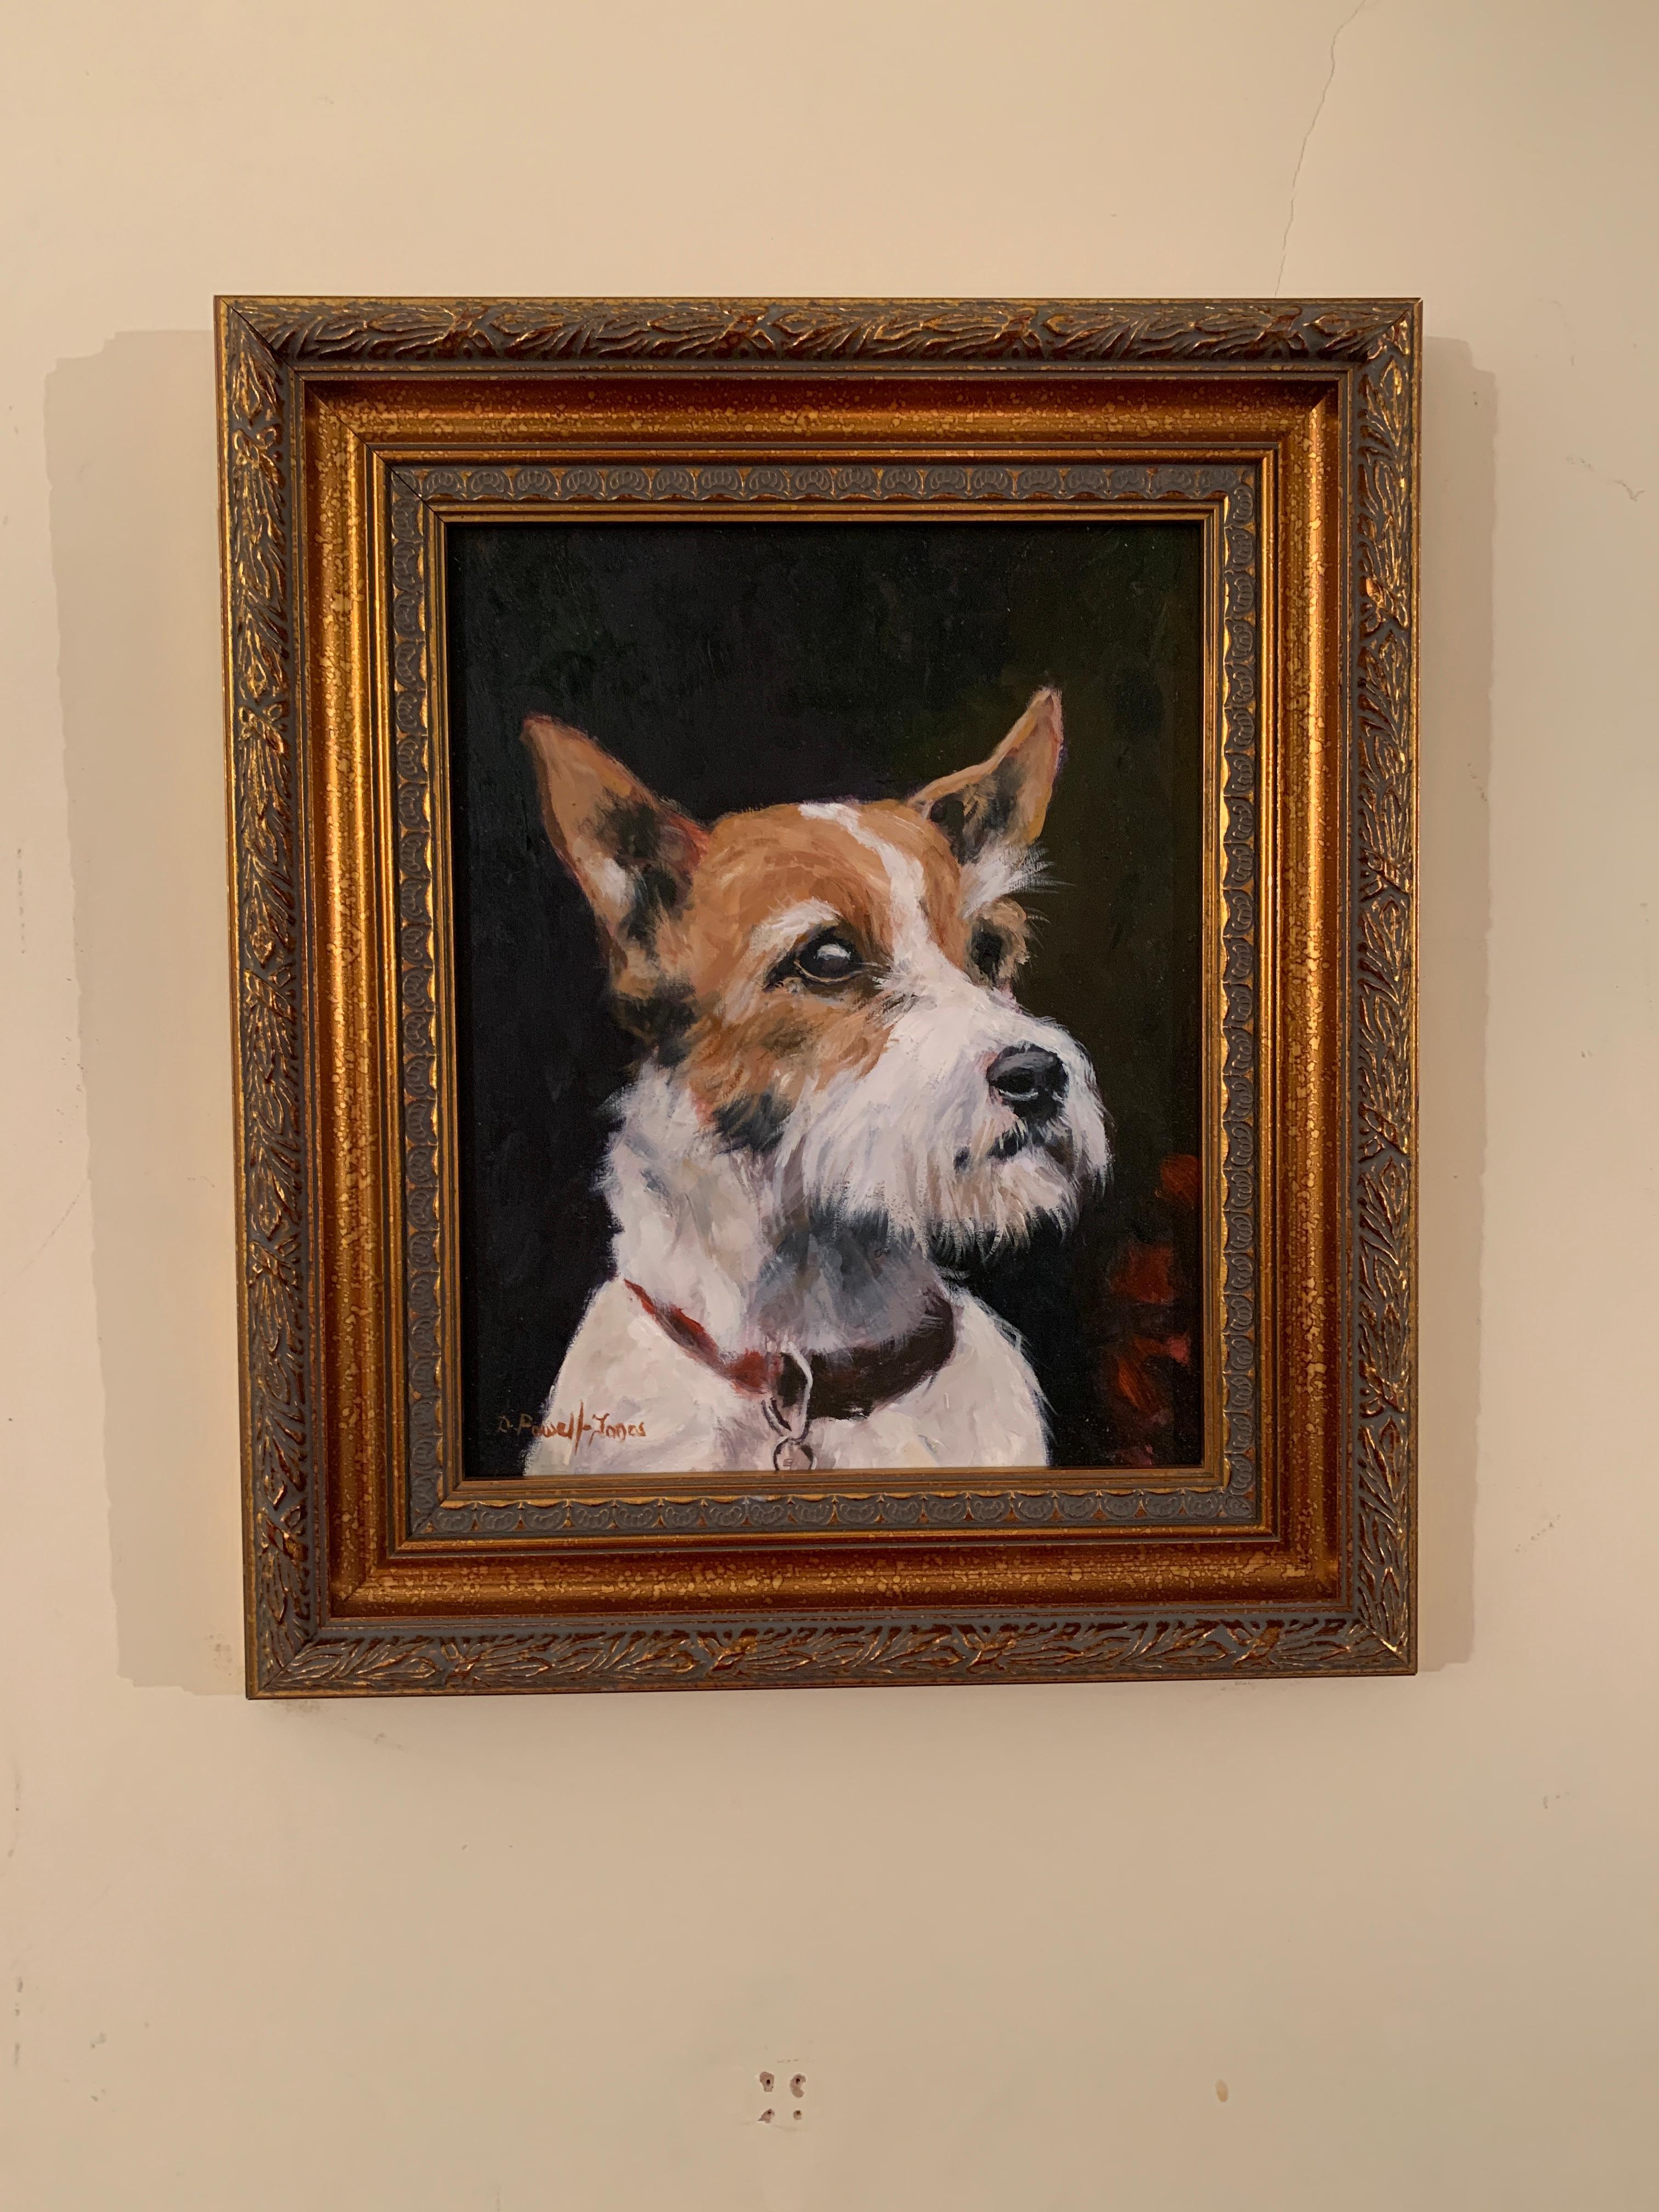 Derek Powell-Jones Animal Painting - Oil painting of an English wire haired terrier dog or puppy